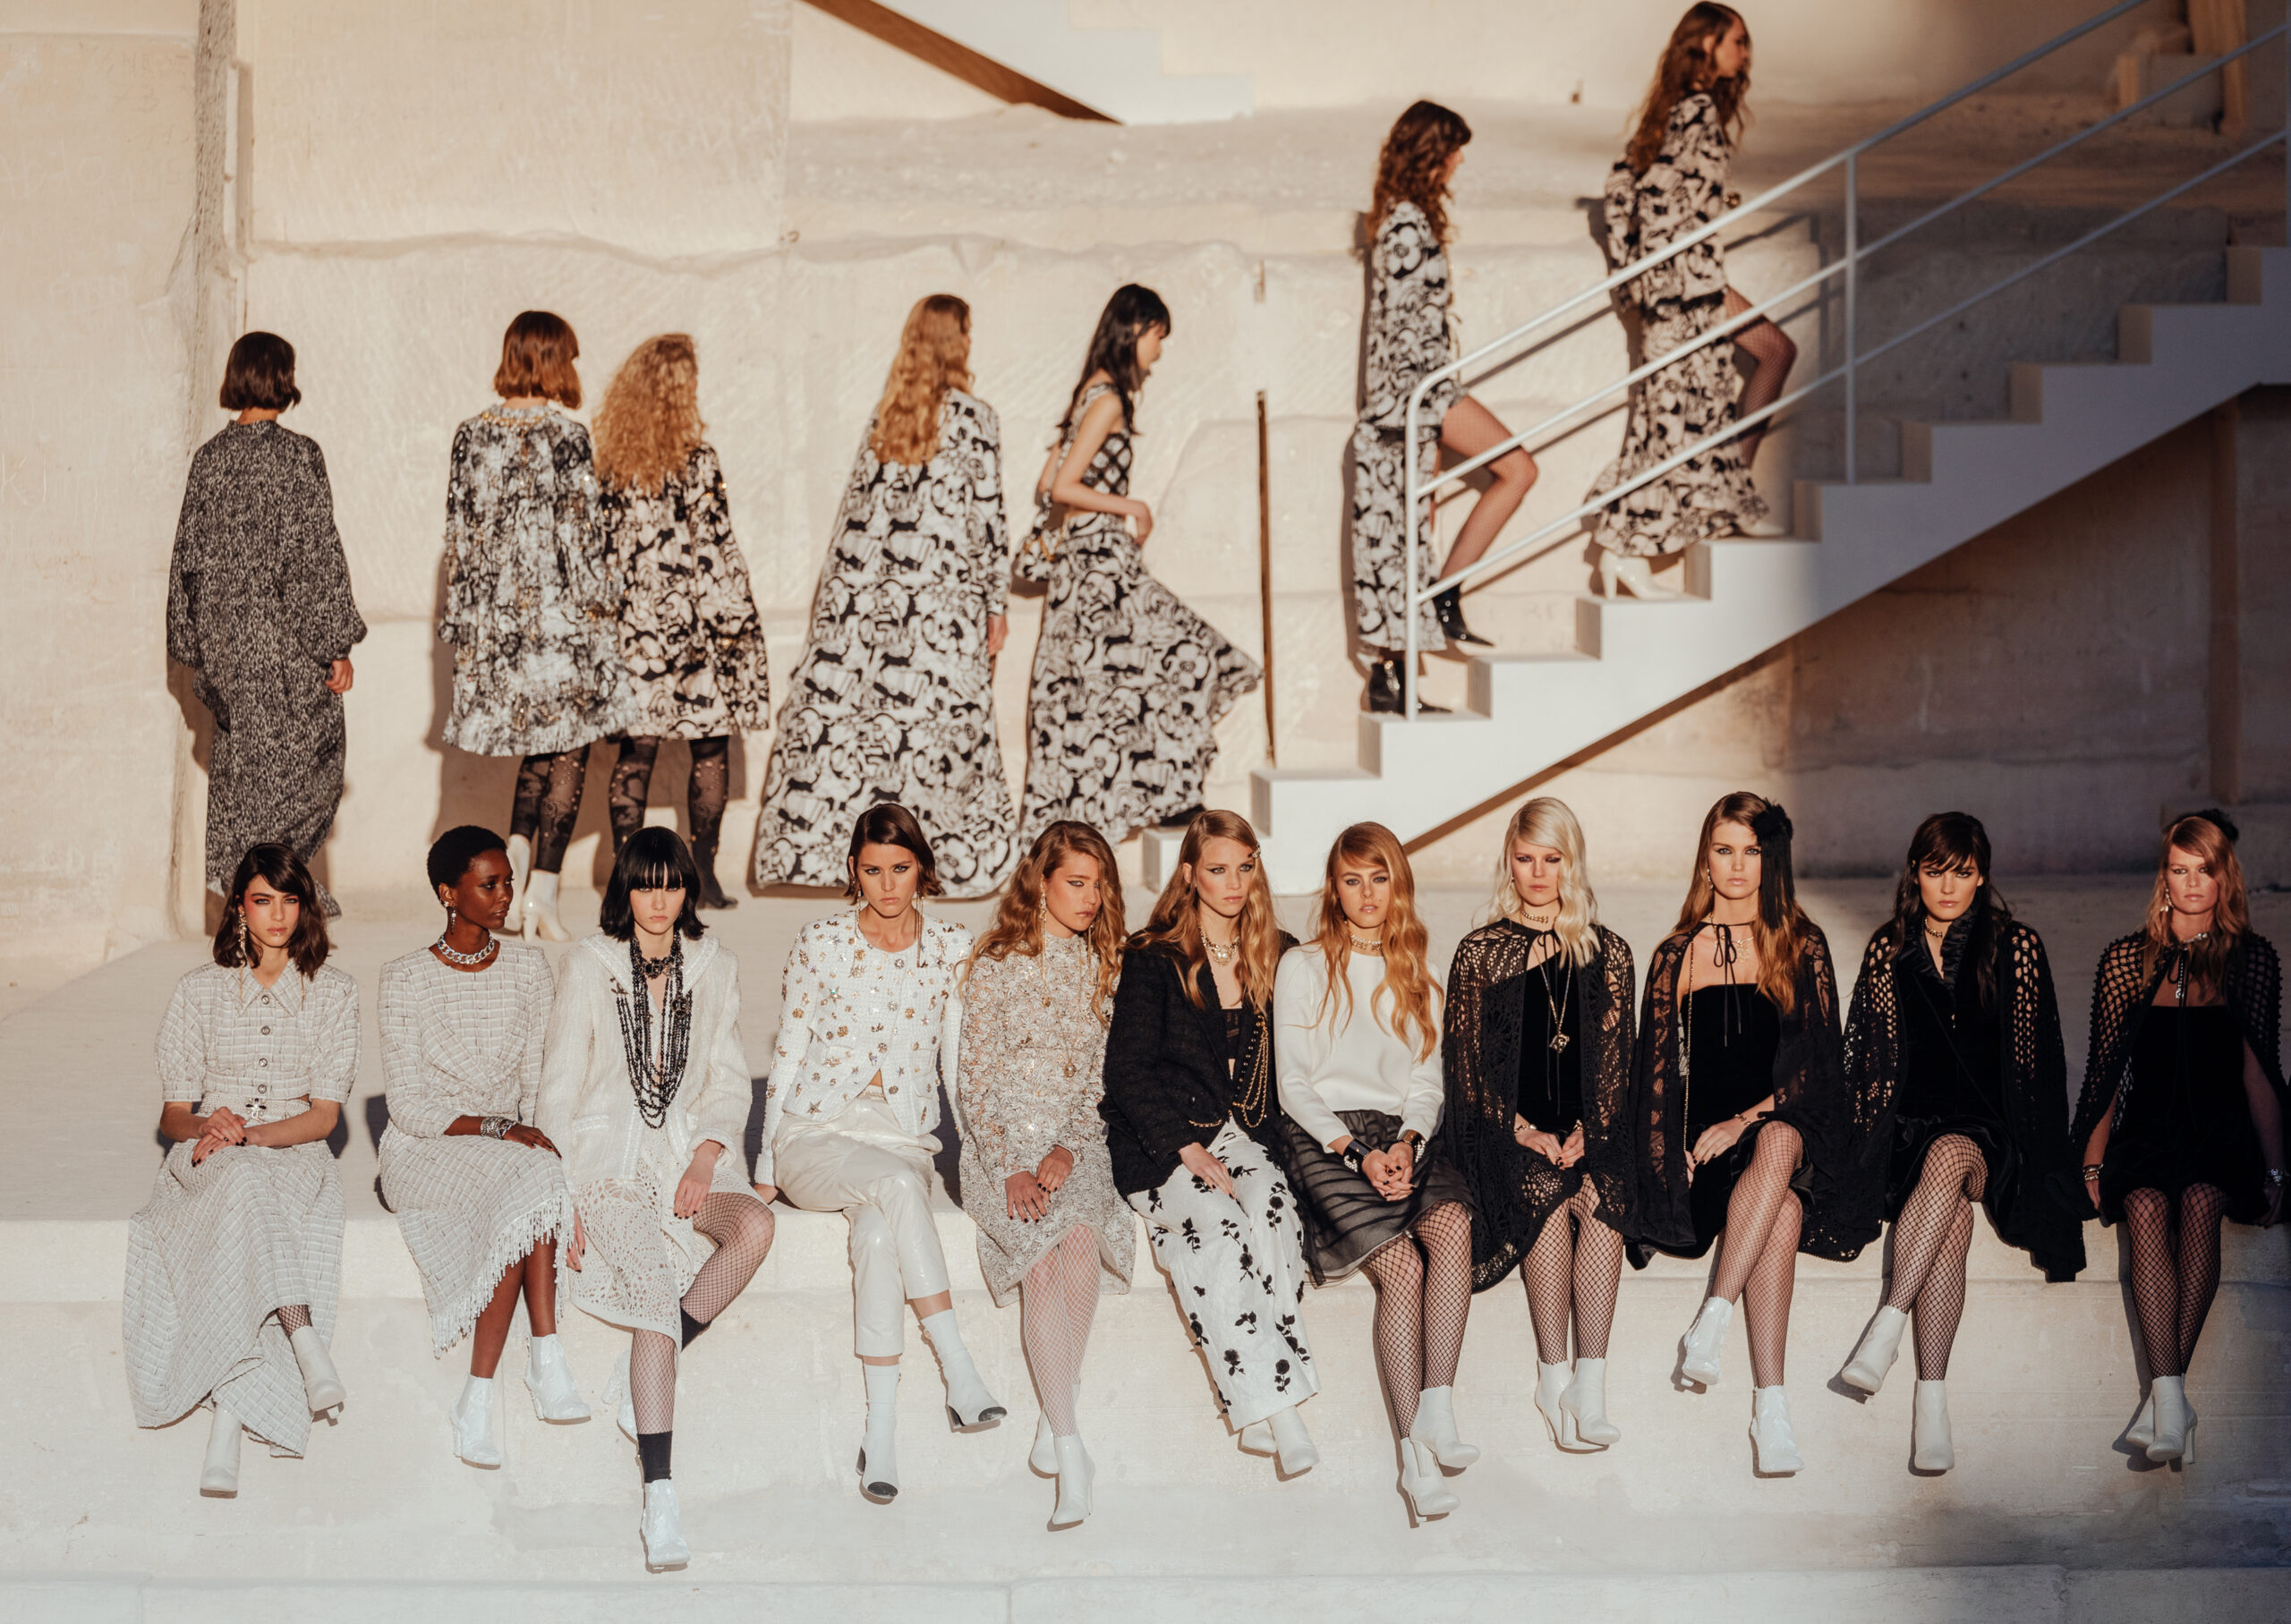 Where will Chanel launch its Cruise 2021-2022 collection? – SeeThru